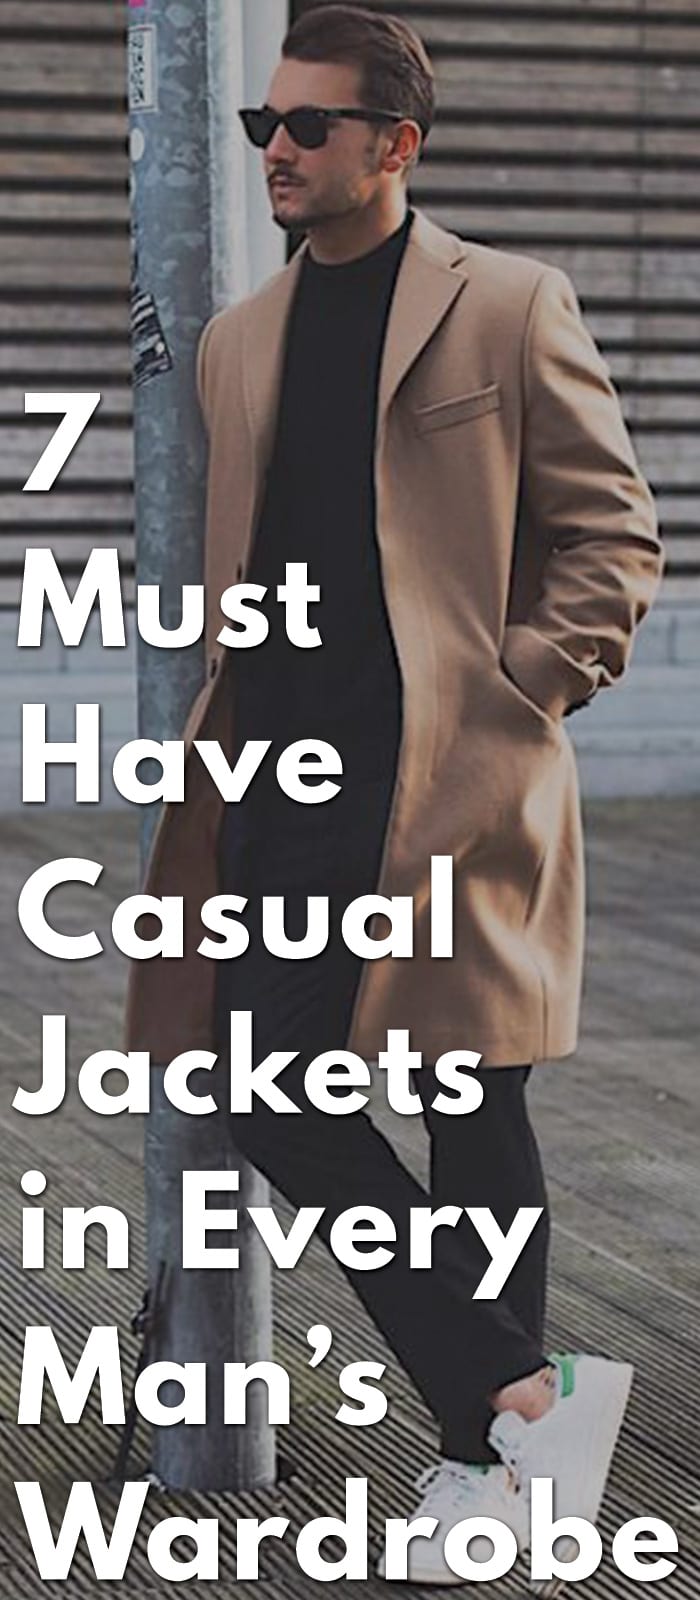 7-Must-Have-Casual-Jackets-in-Every-Man’s-Wardrobe